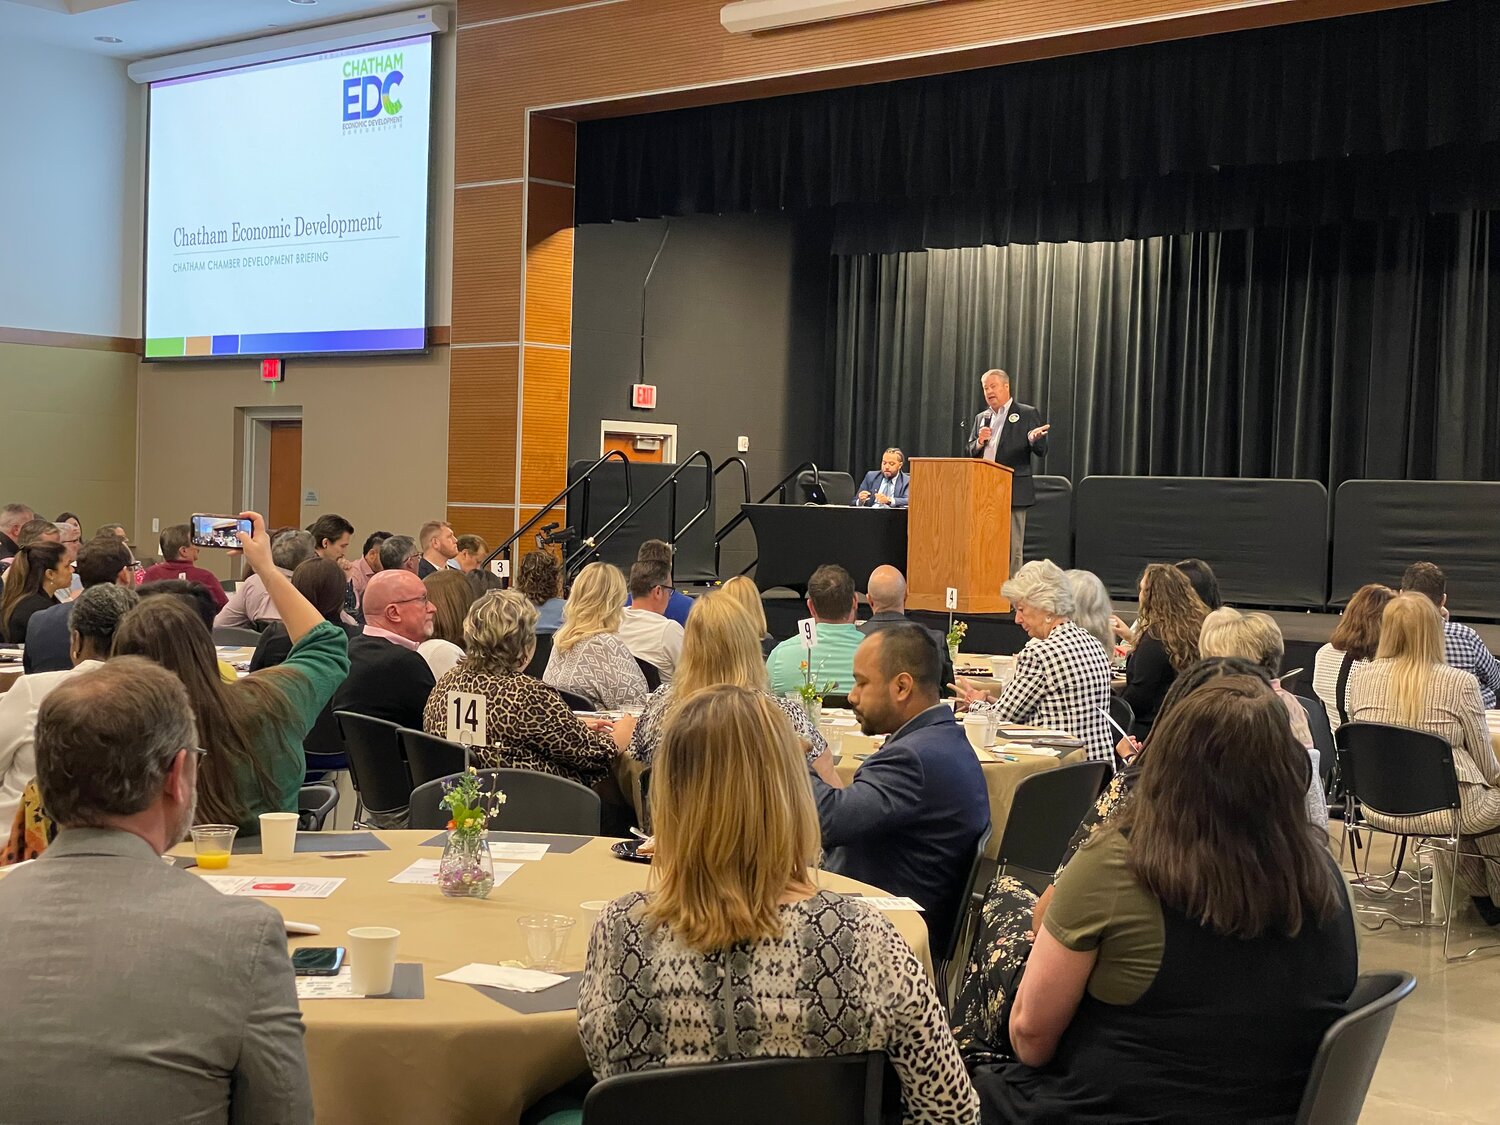 The Chatham Chamber of Commerce hosted a development briefing last Wednesday. The event featured speakers from local government, Central Carolina Community College and Chatham Economic Development Corporation.